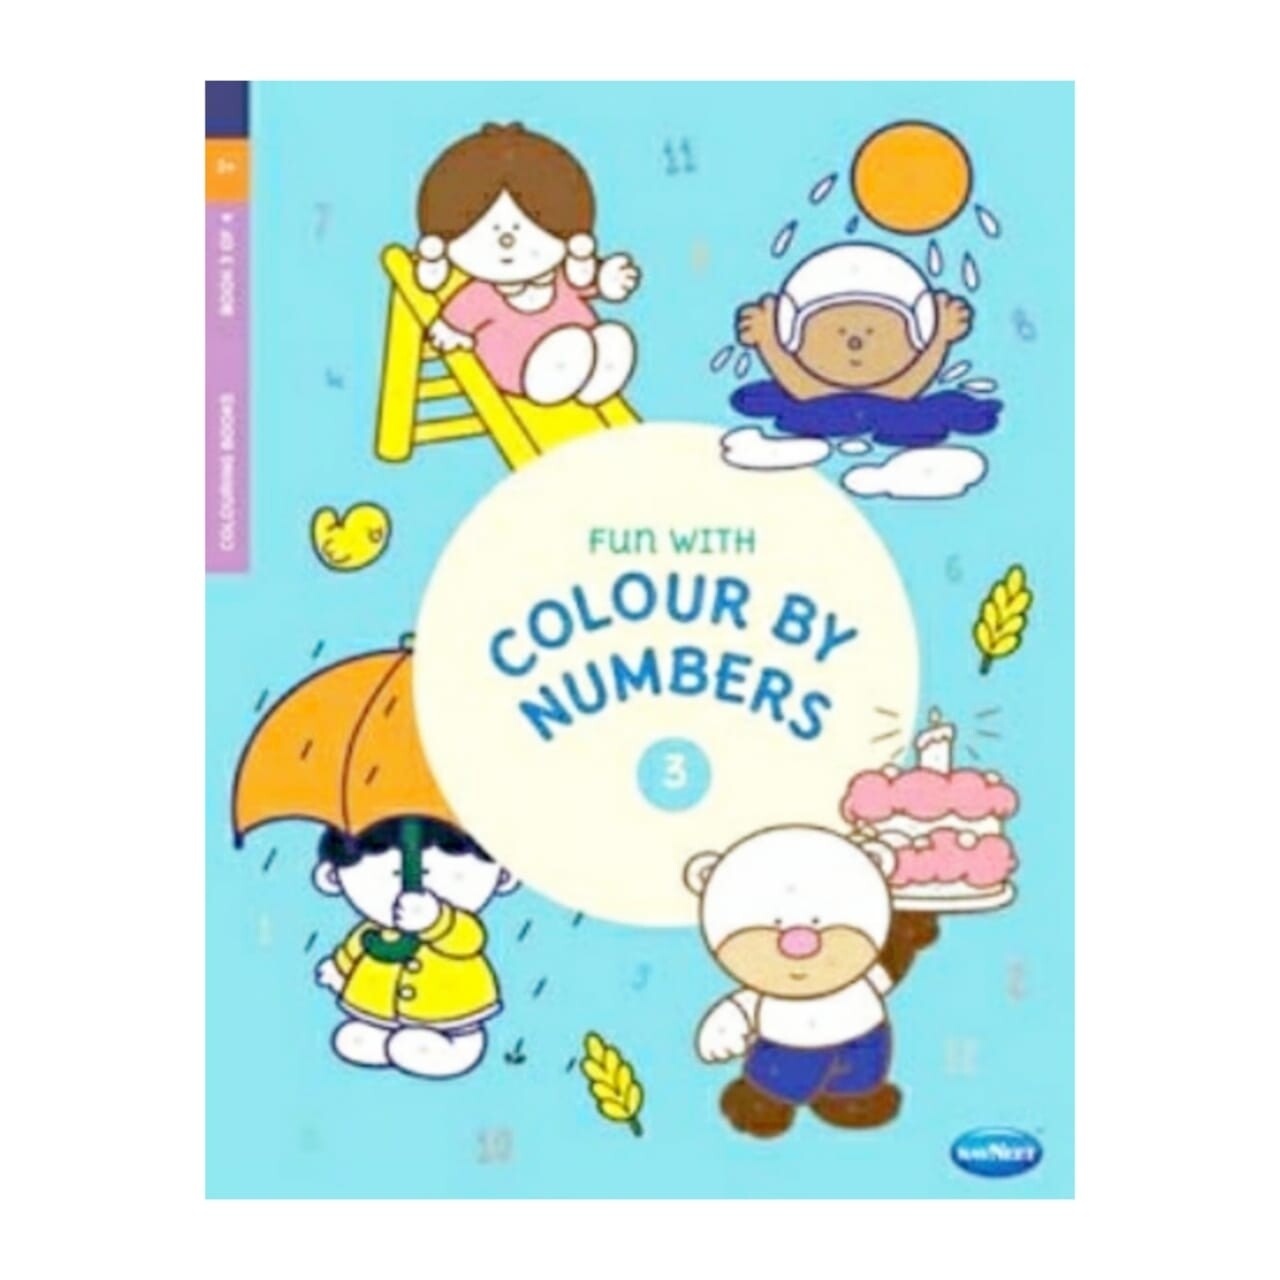 Fun With Colour By Numbers - Set of 2 Books 